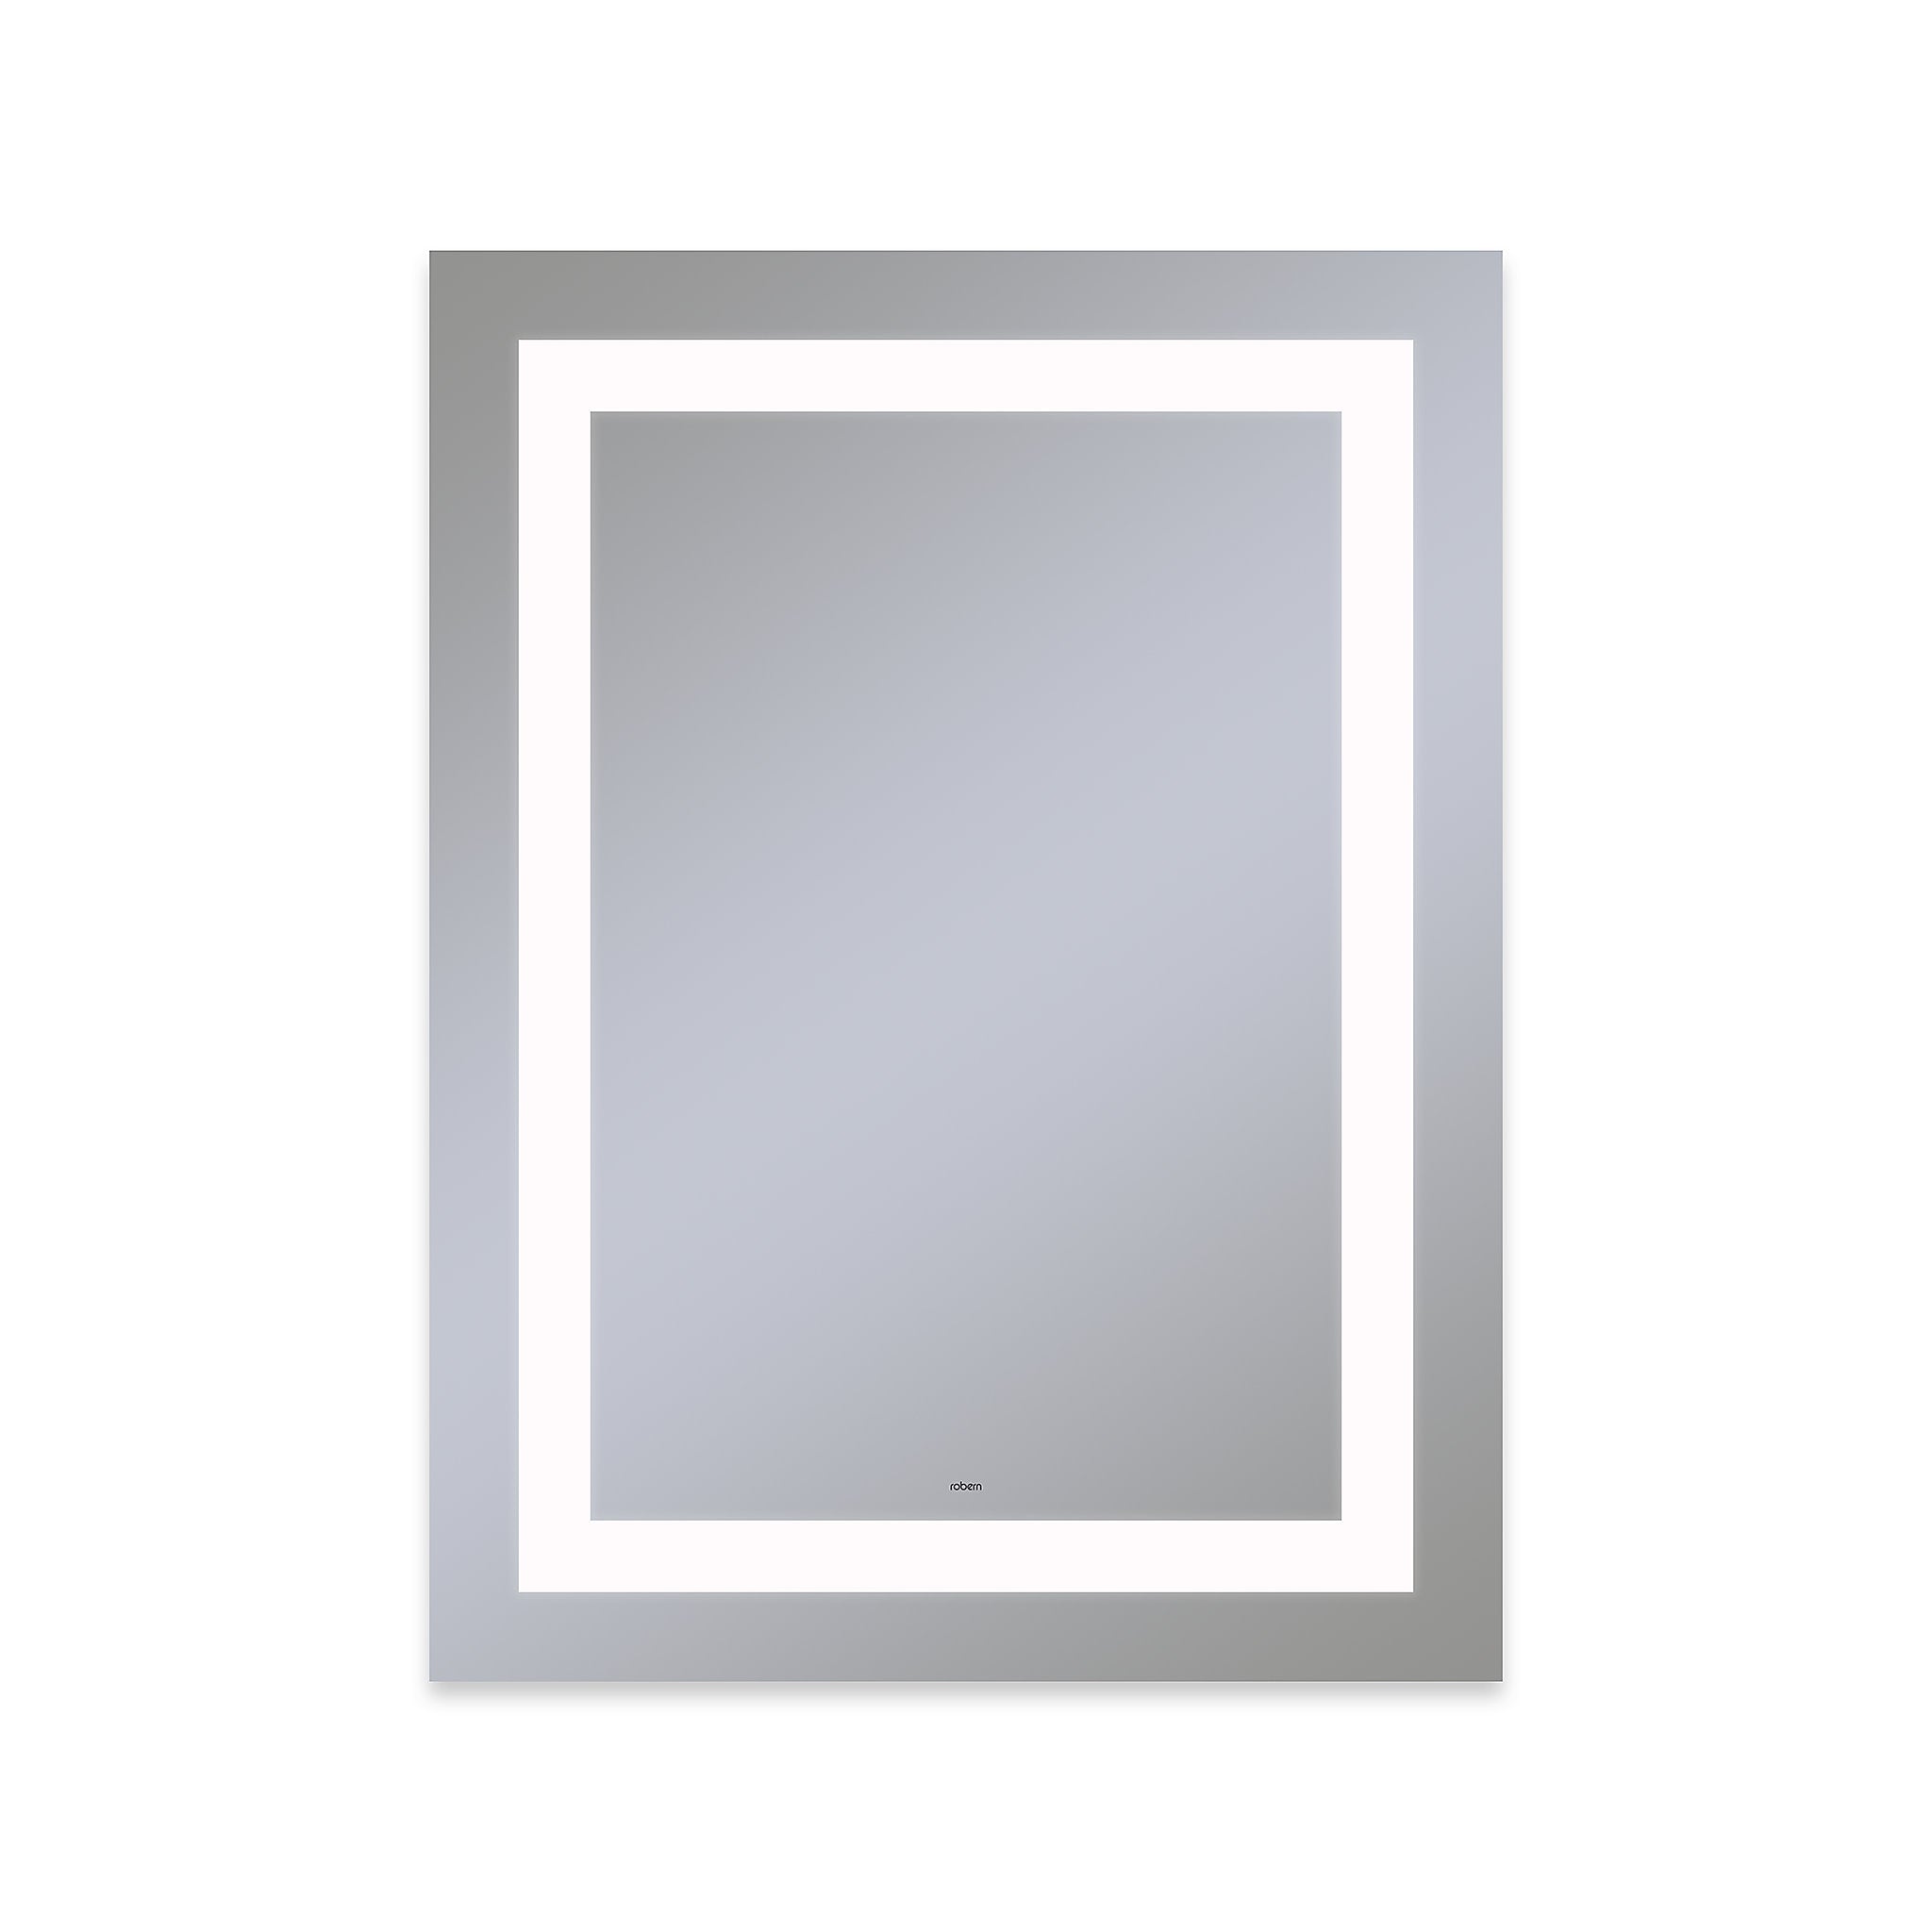 robern YM3040RIFPD4 Vitality Lighted Mirror, 30" x 40" x 1-3/4", Rectangle, Inset Light Pattern, 4000K Temperature (Cool Light), Dimmable, Defogger